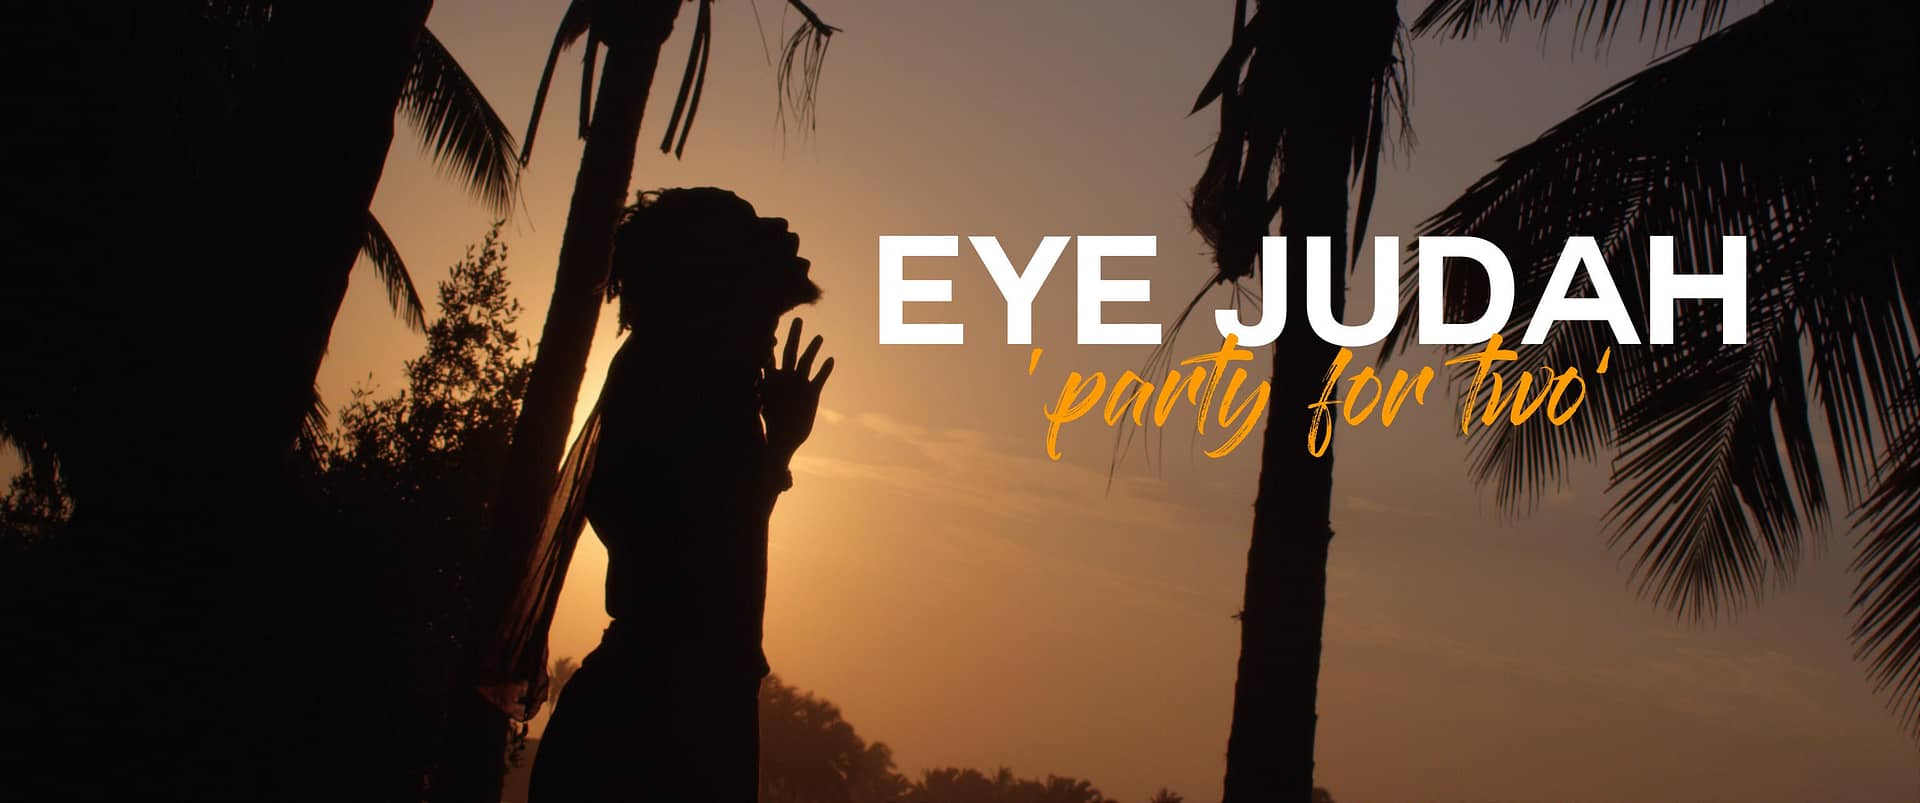 Eye Judah - Party For Two 1